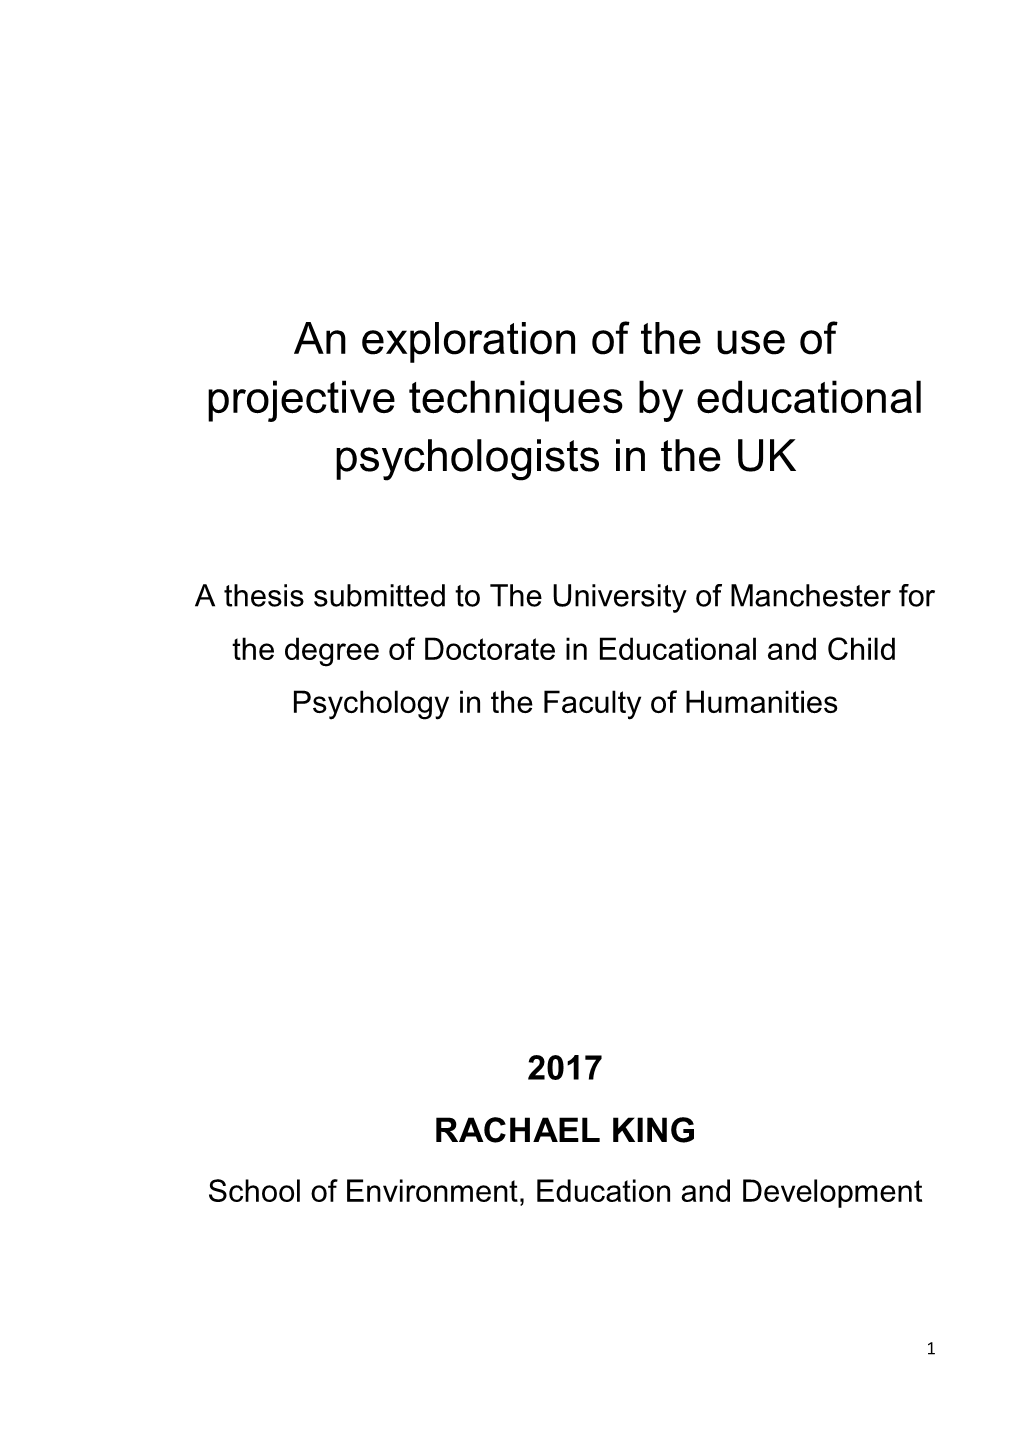 An Exploration of the Use of Projective Techniques by Educational Psychologists in the UK